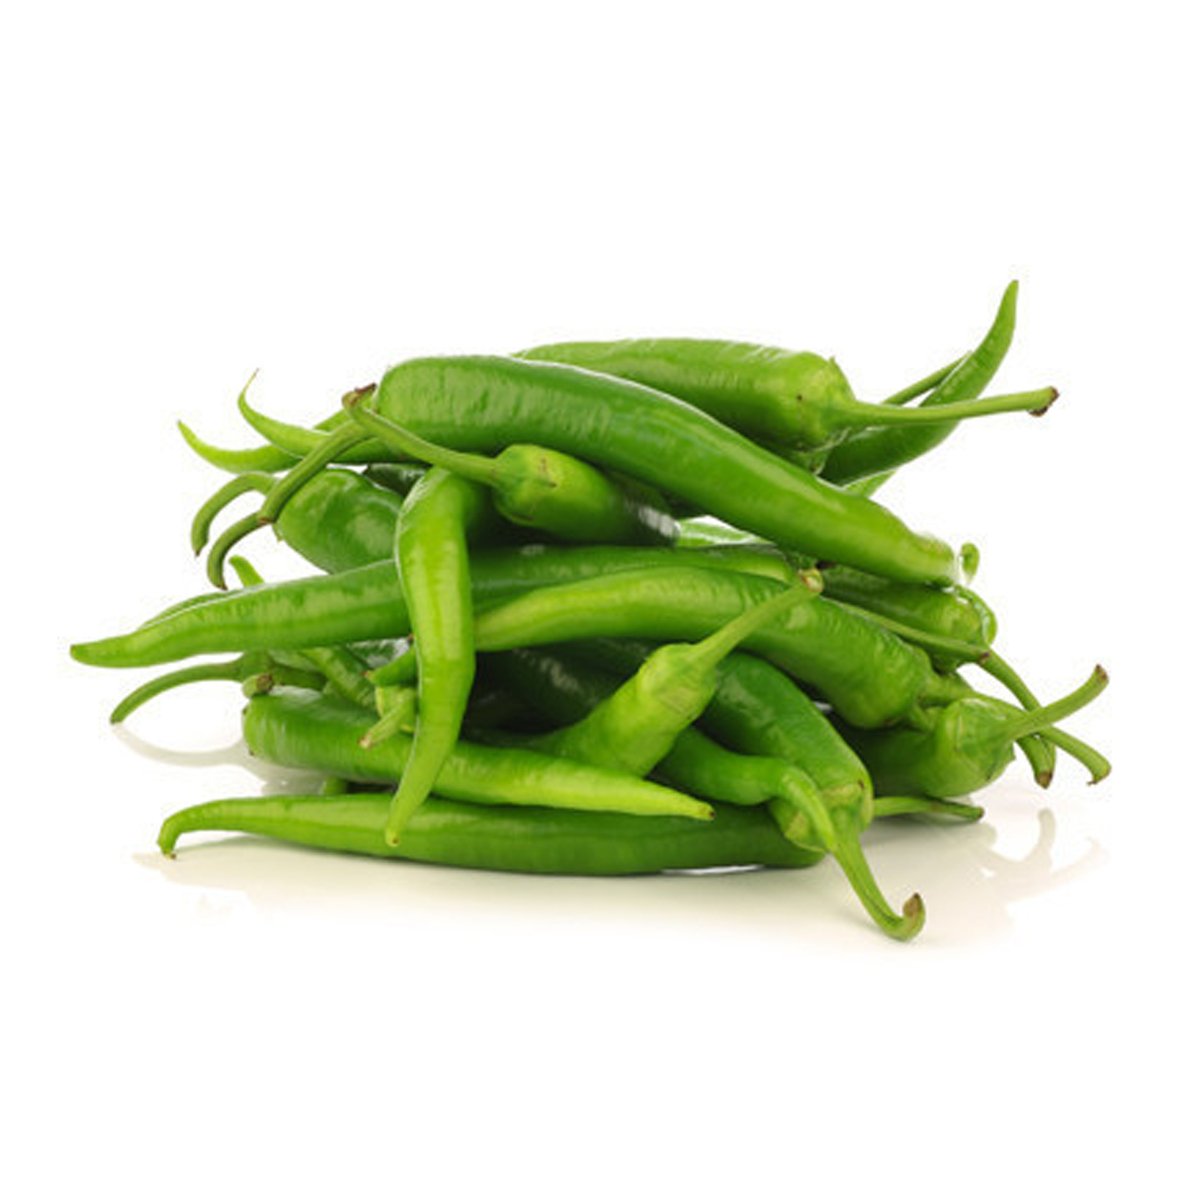 Green Chilli Packet 200g Approx. Weight